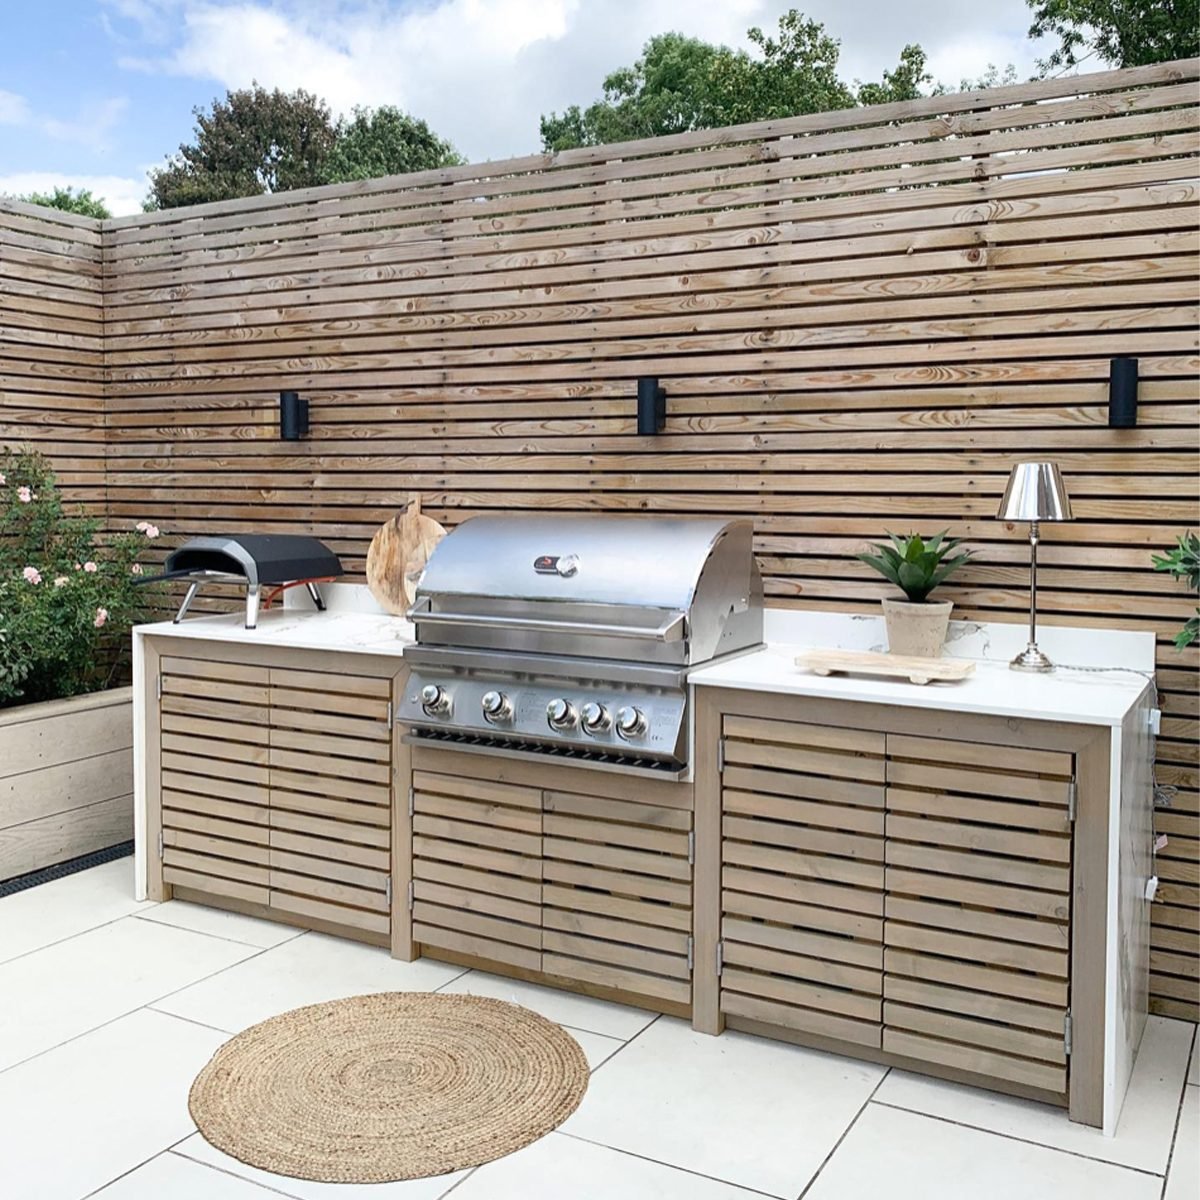 10 Outdoor Cooking Station Ideas for 2023 | Family Handyman